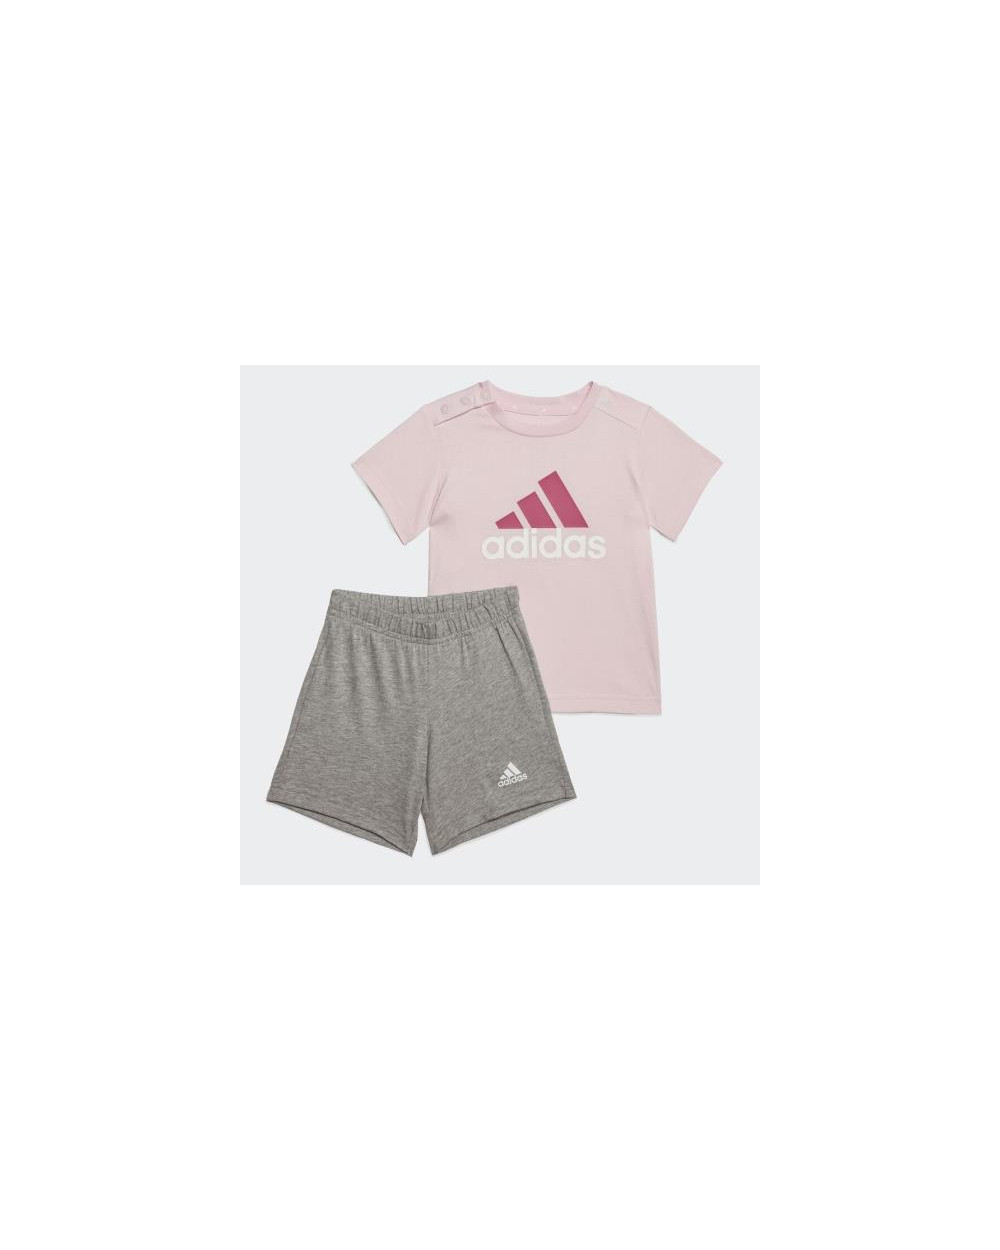 Completino adidas baby hr5886